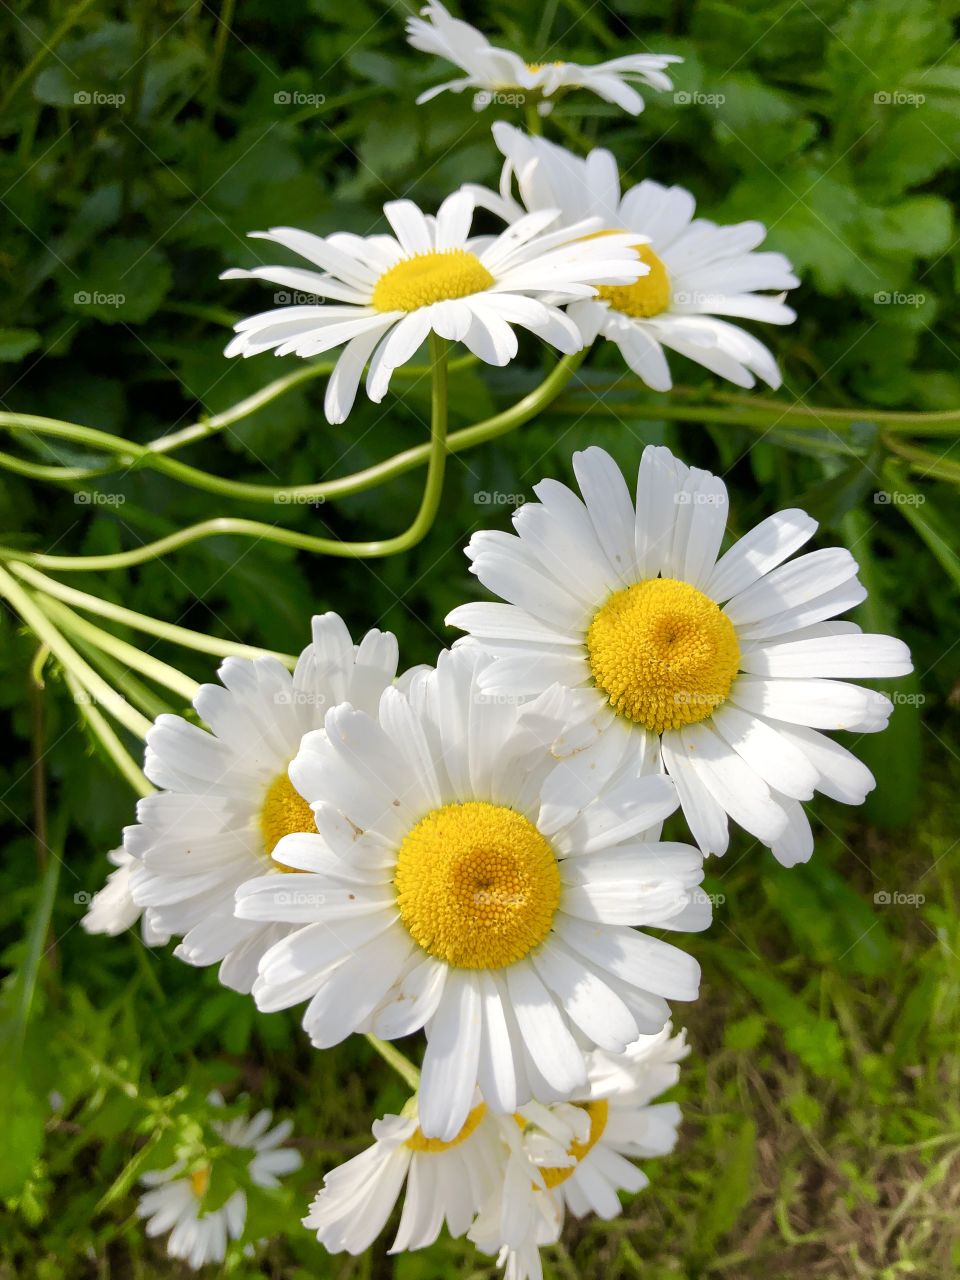 Large Daisies 